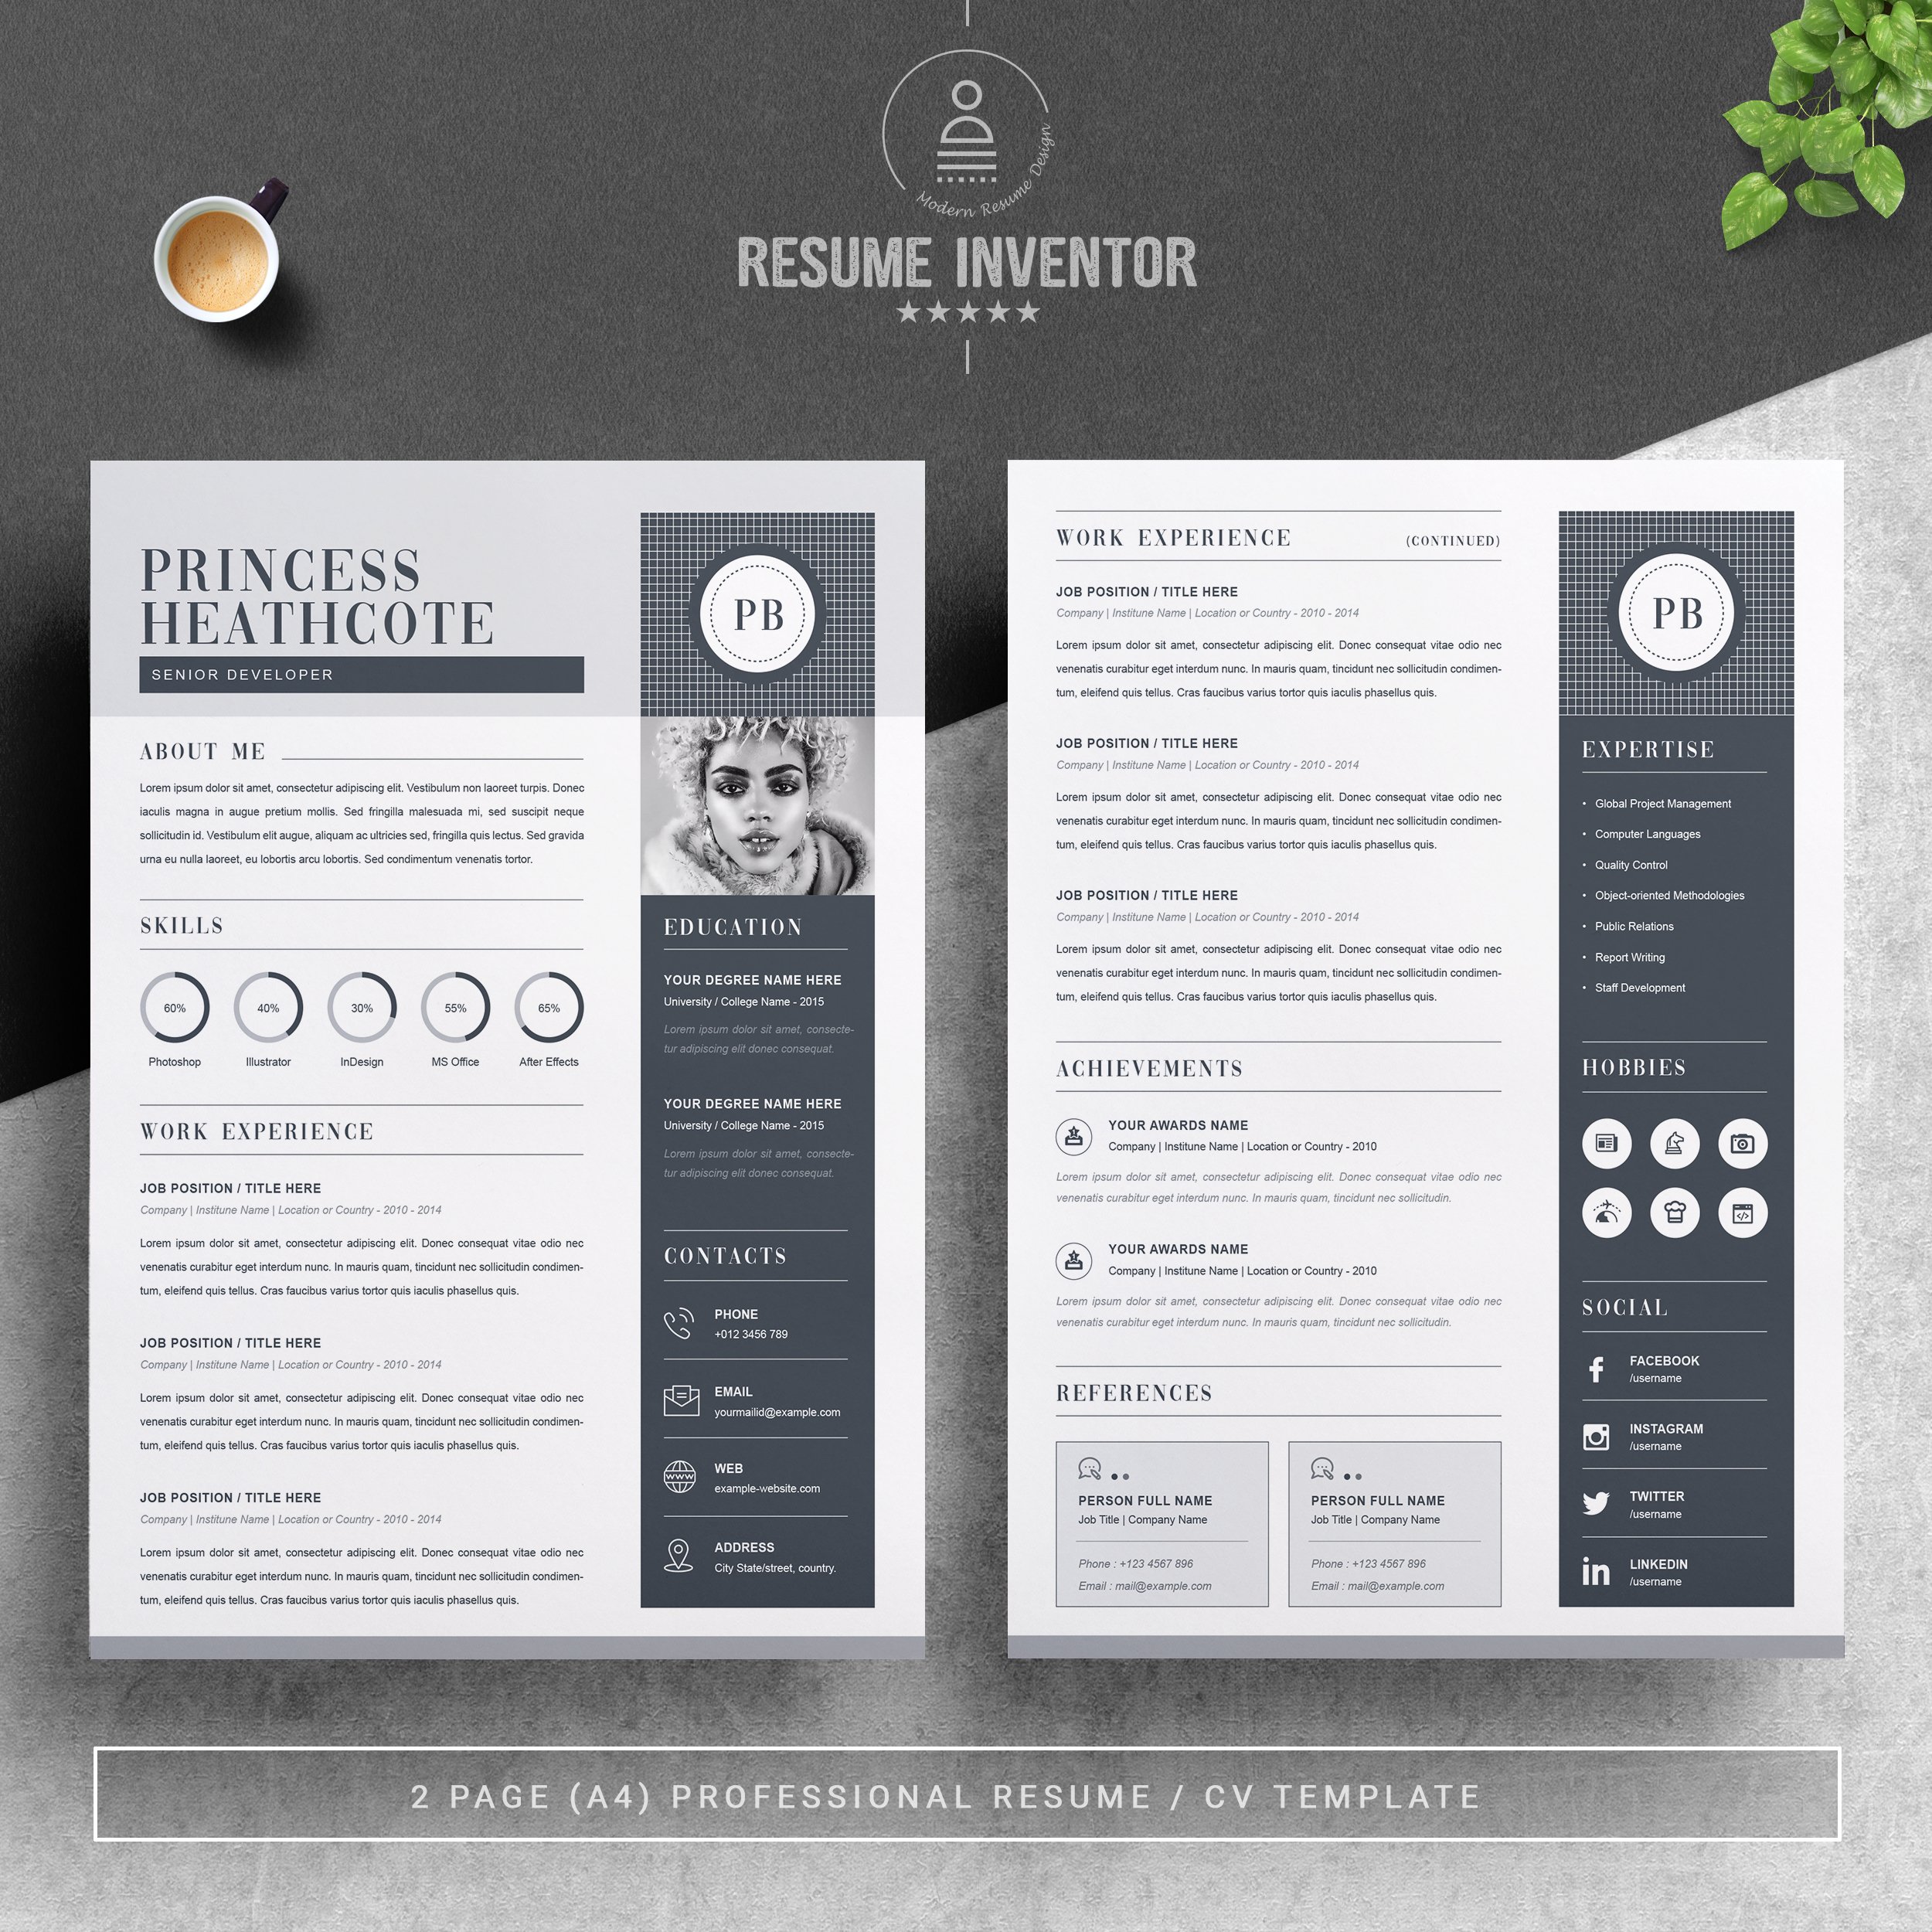 Resume Template For Web Developer preview image.